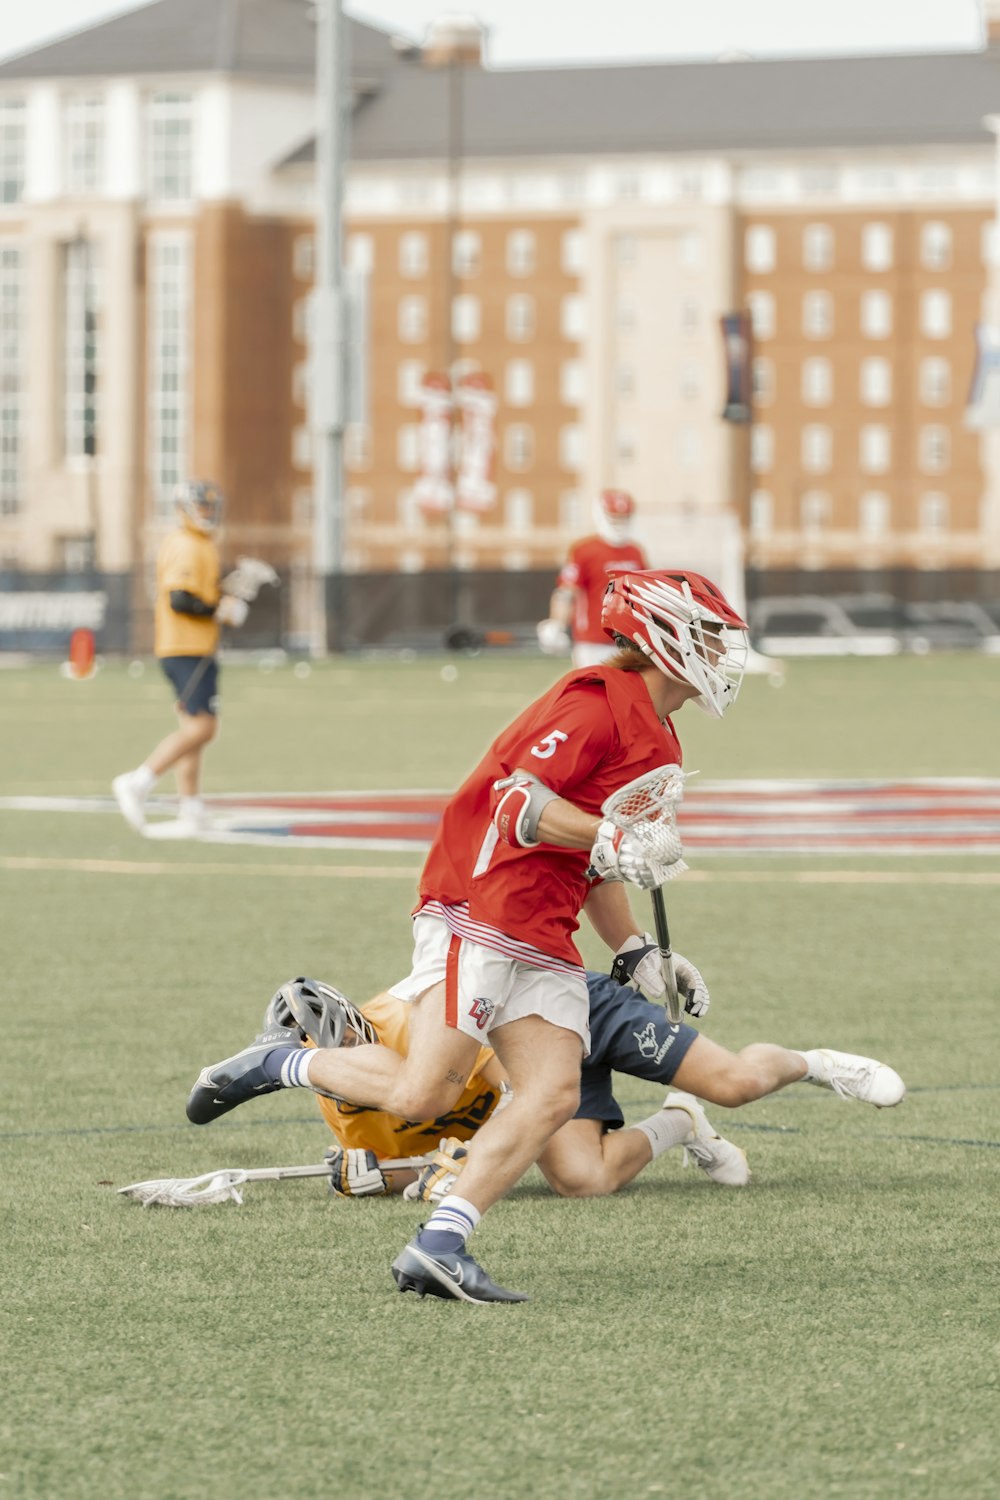 a group of people playing a game of lacrosse